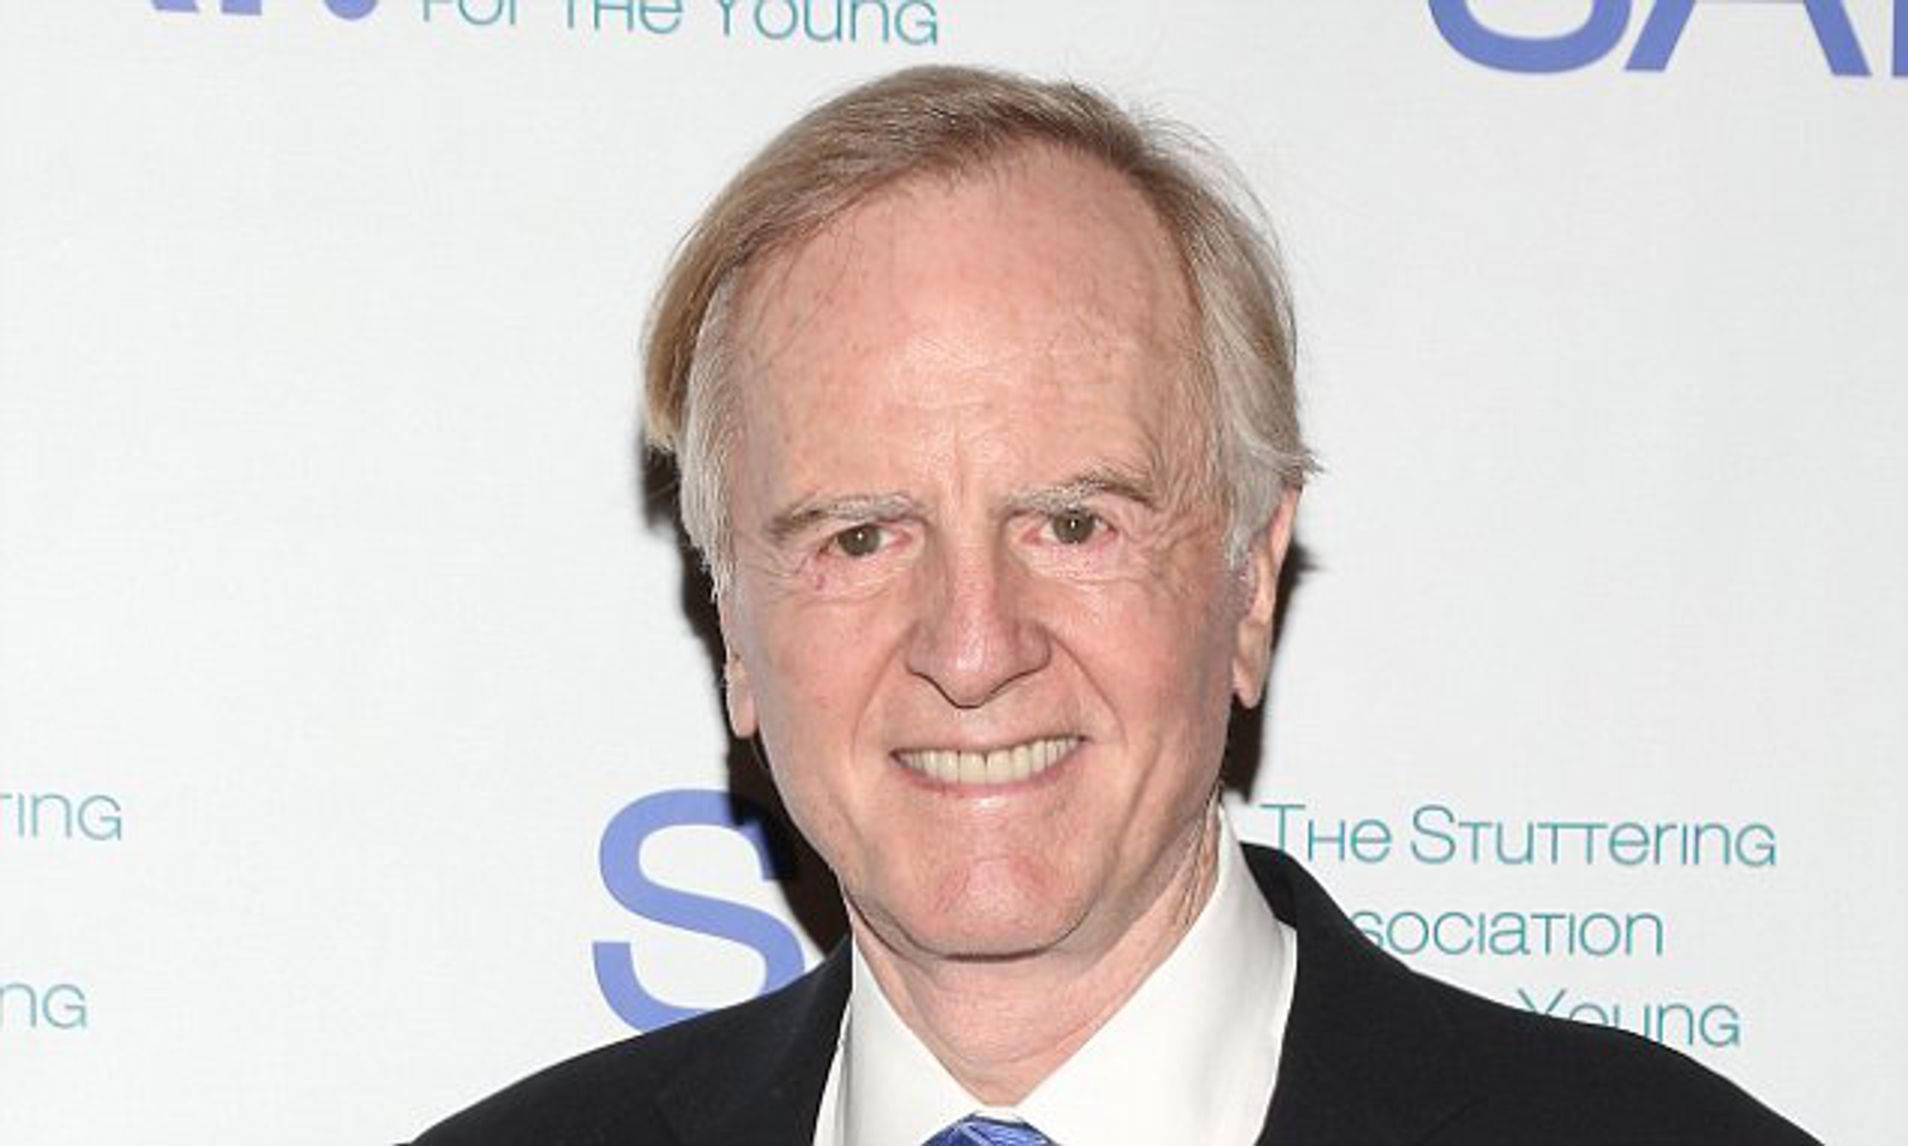 John Sculley Headshot At Say Benefit 2014 Picture